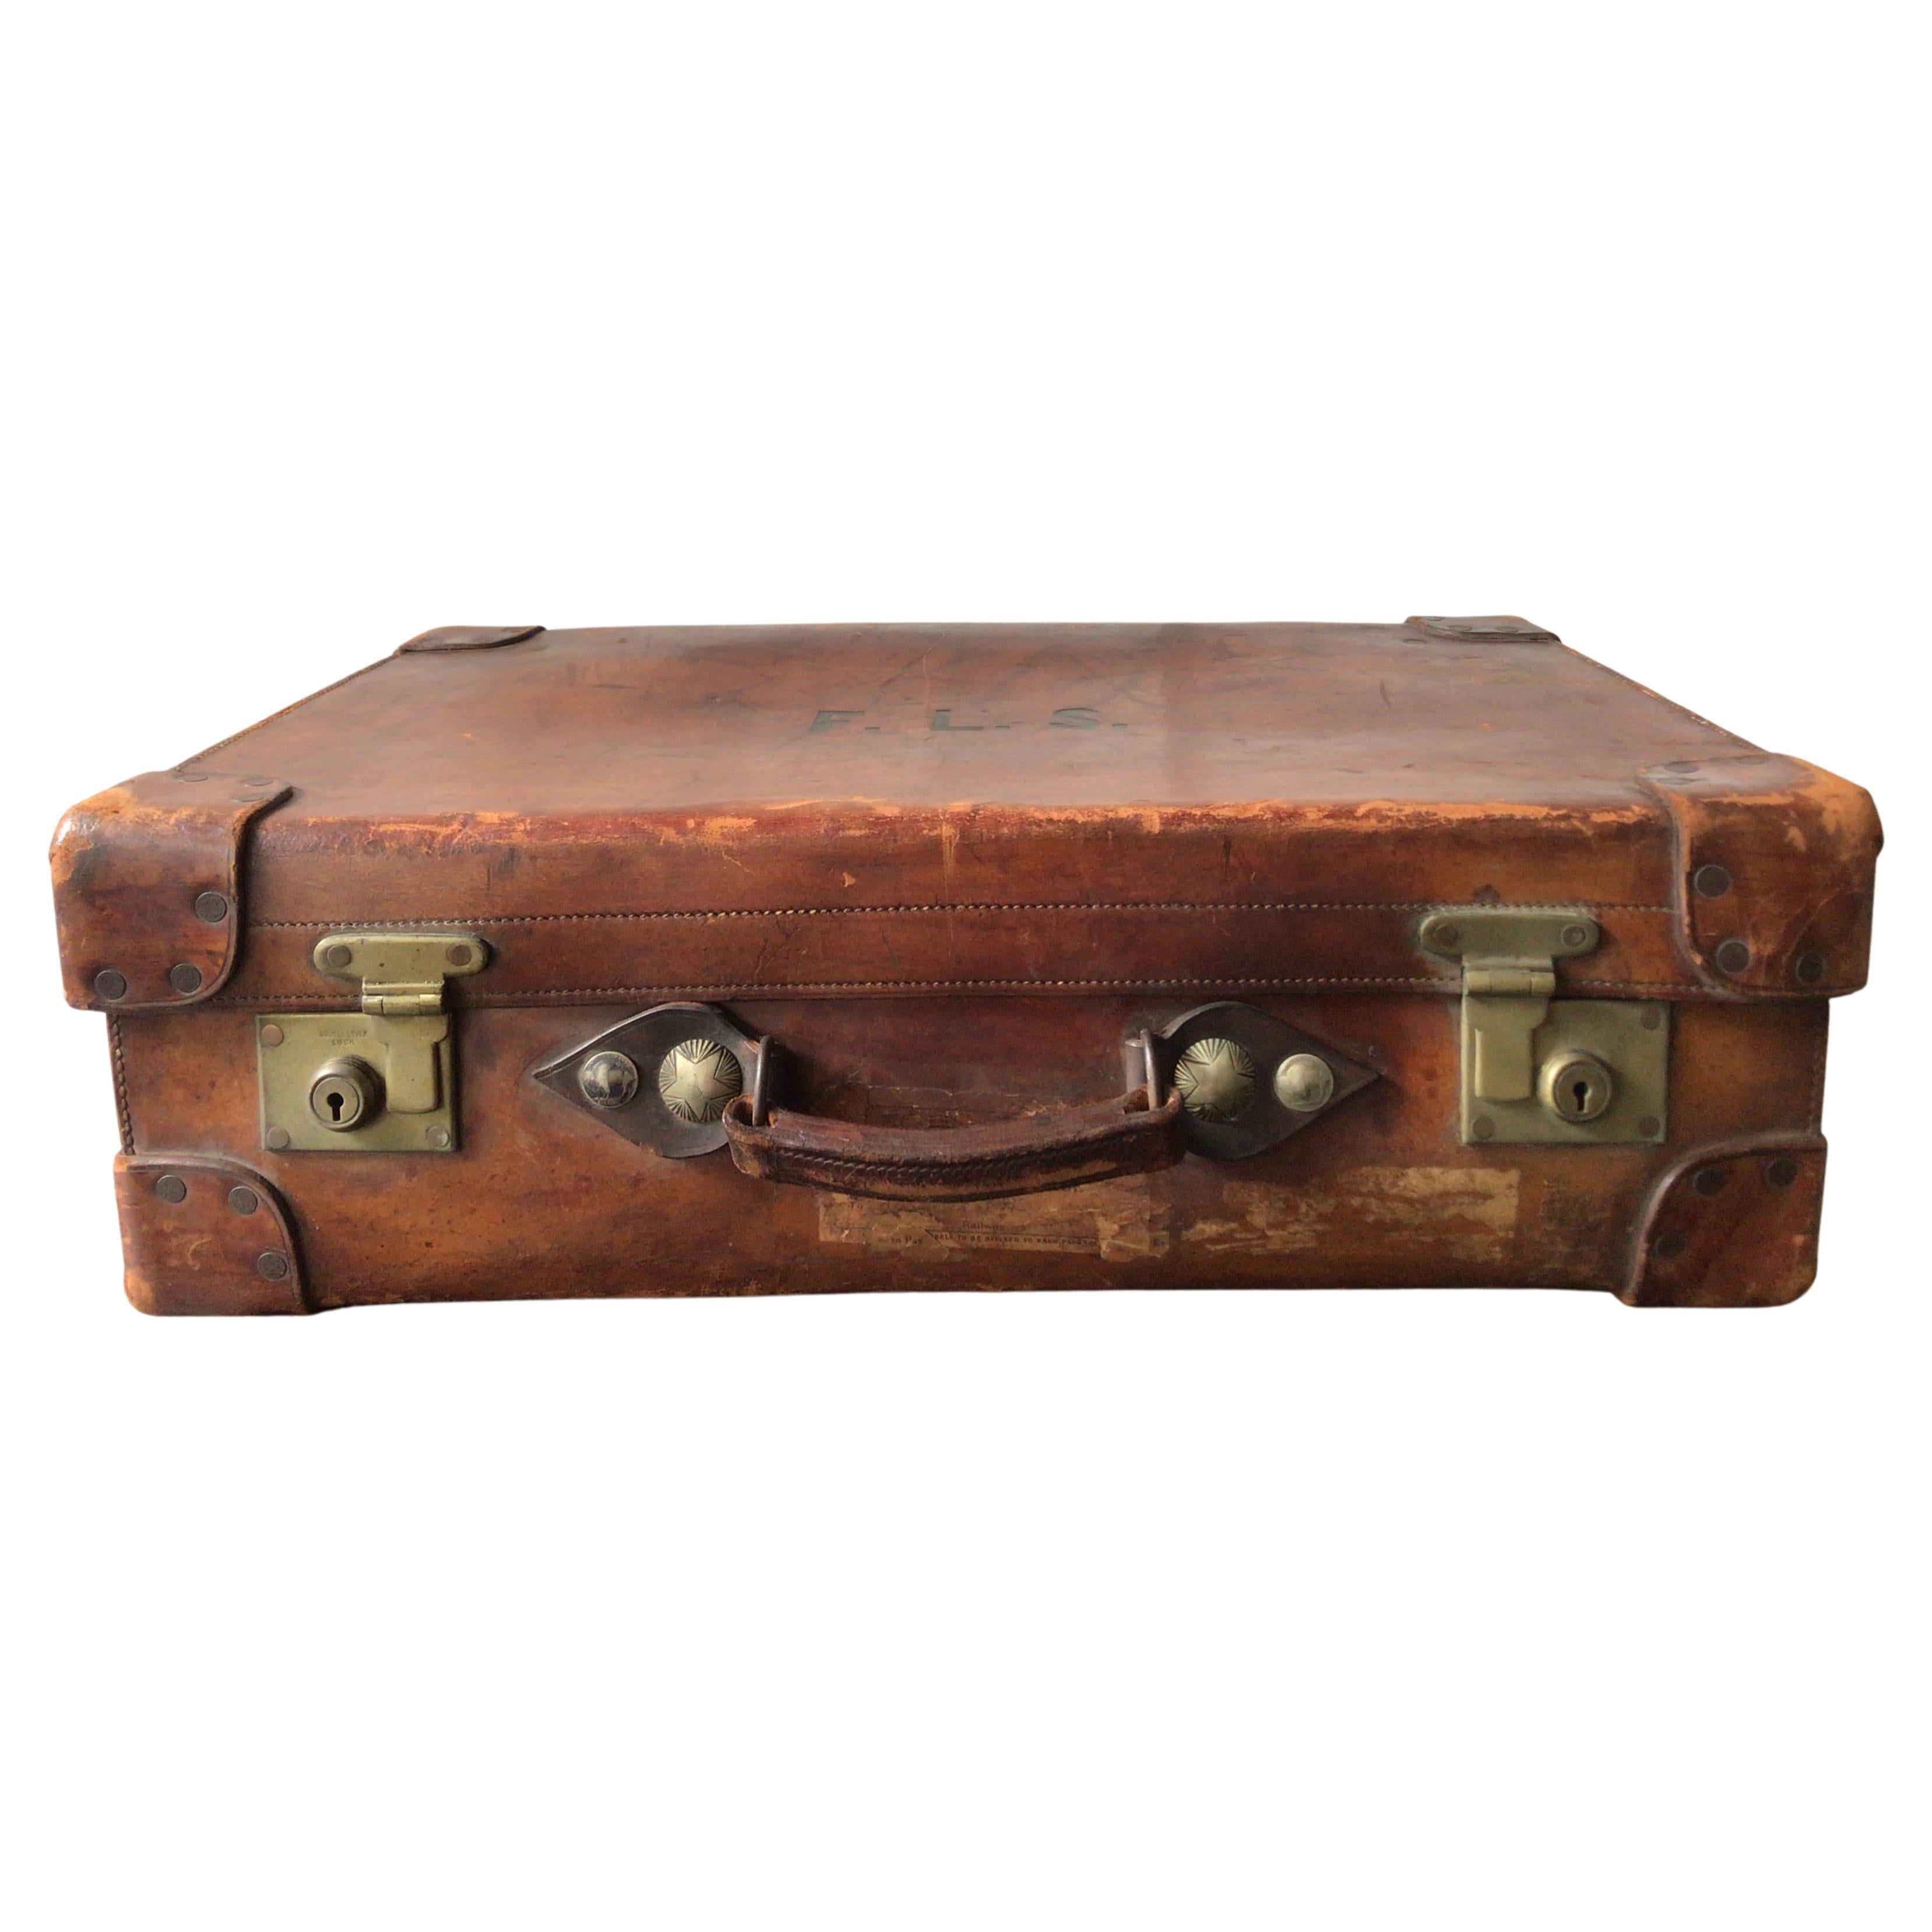 1910 Leather Suitcase